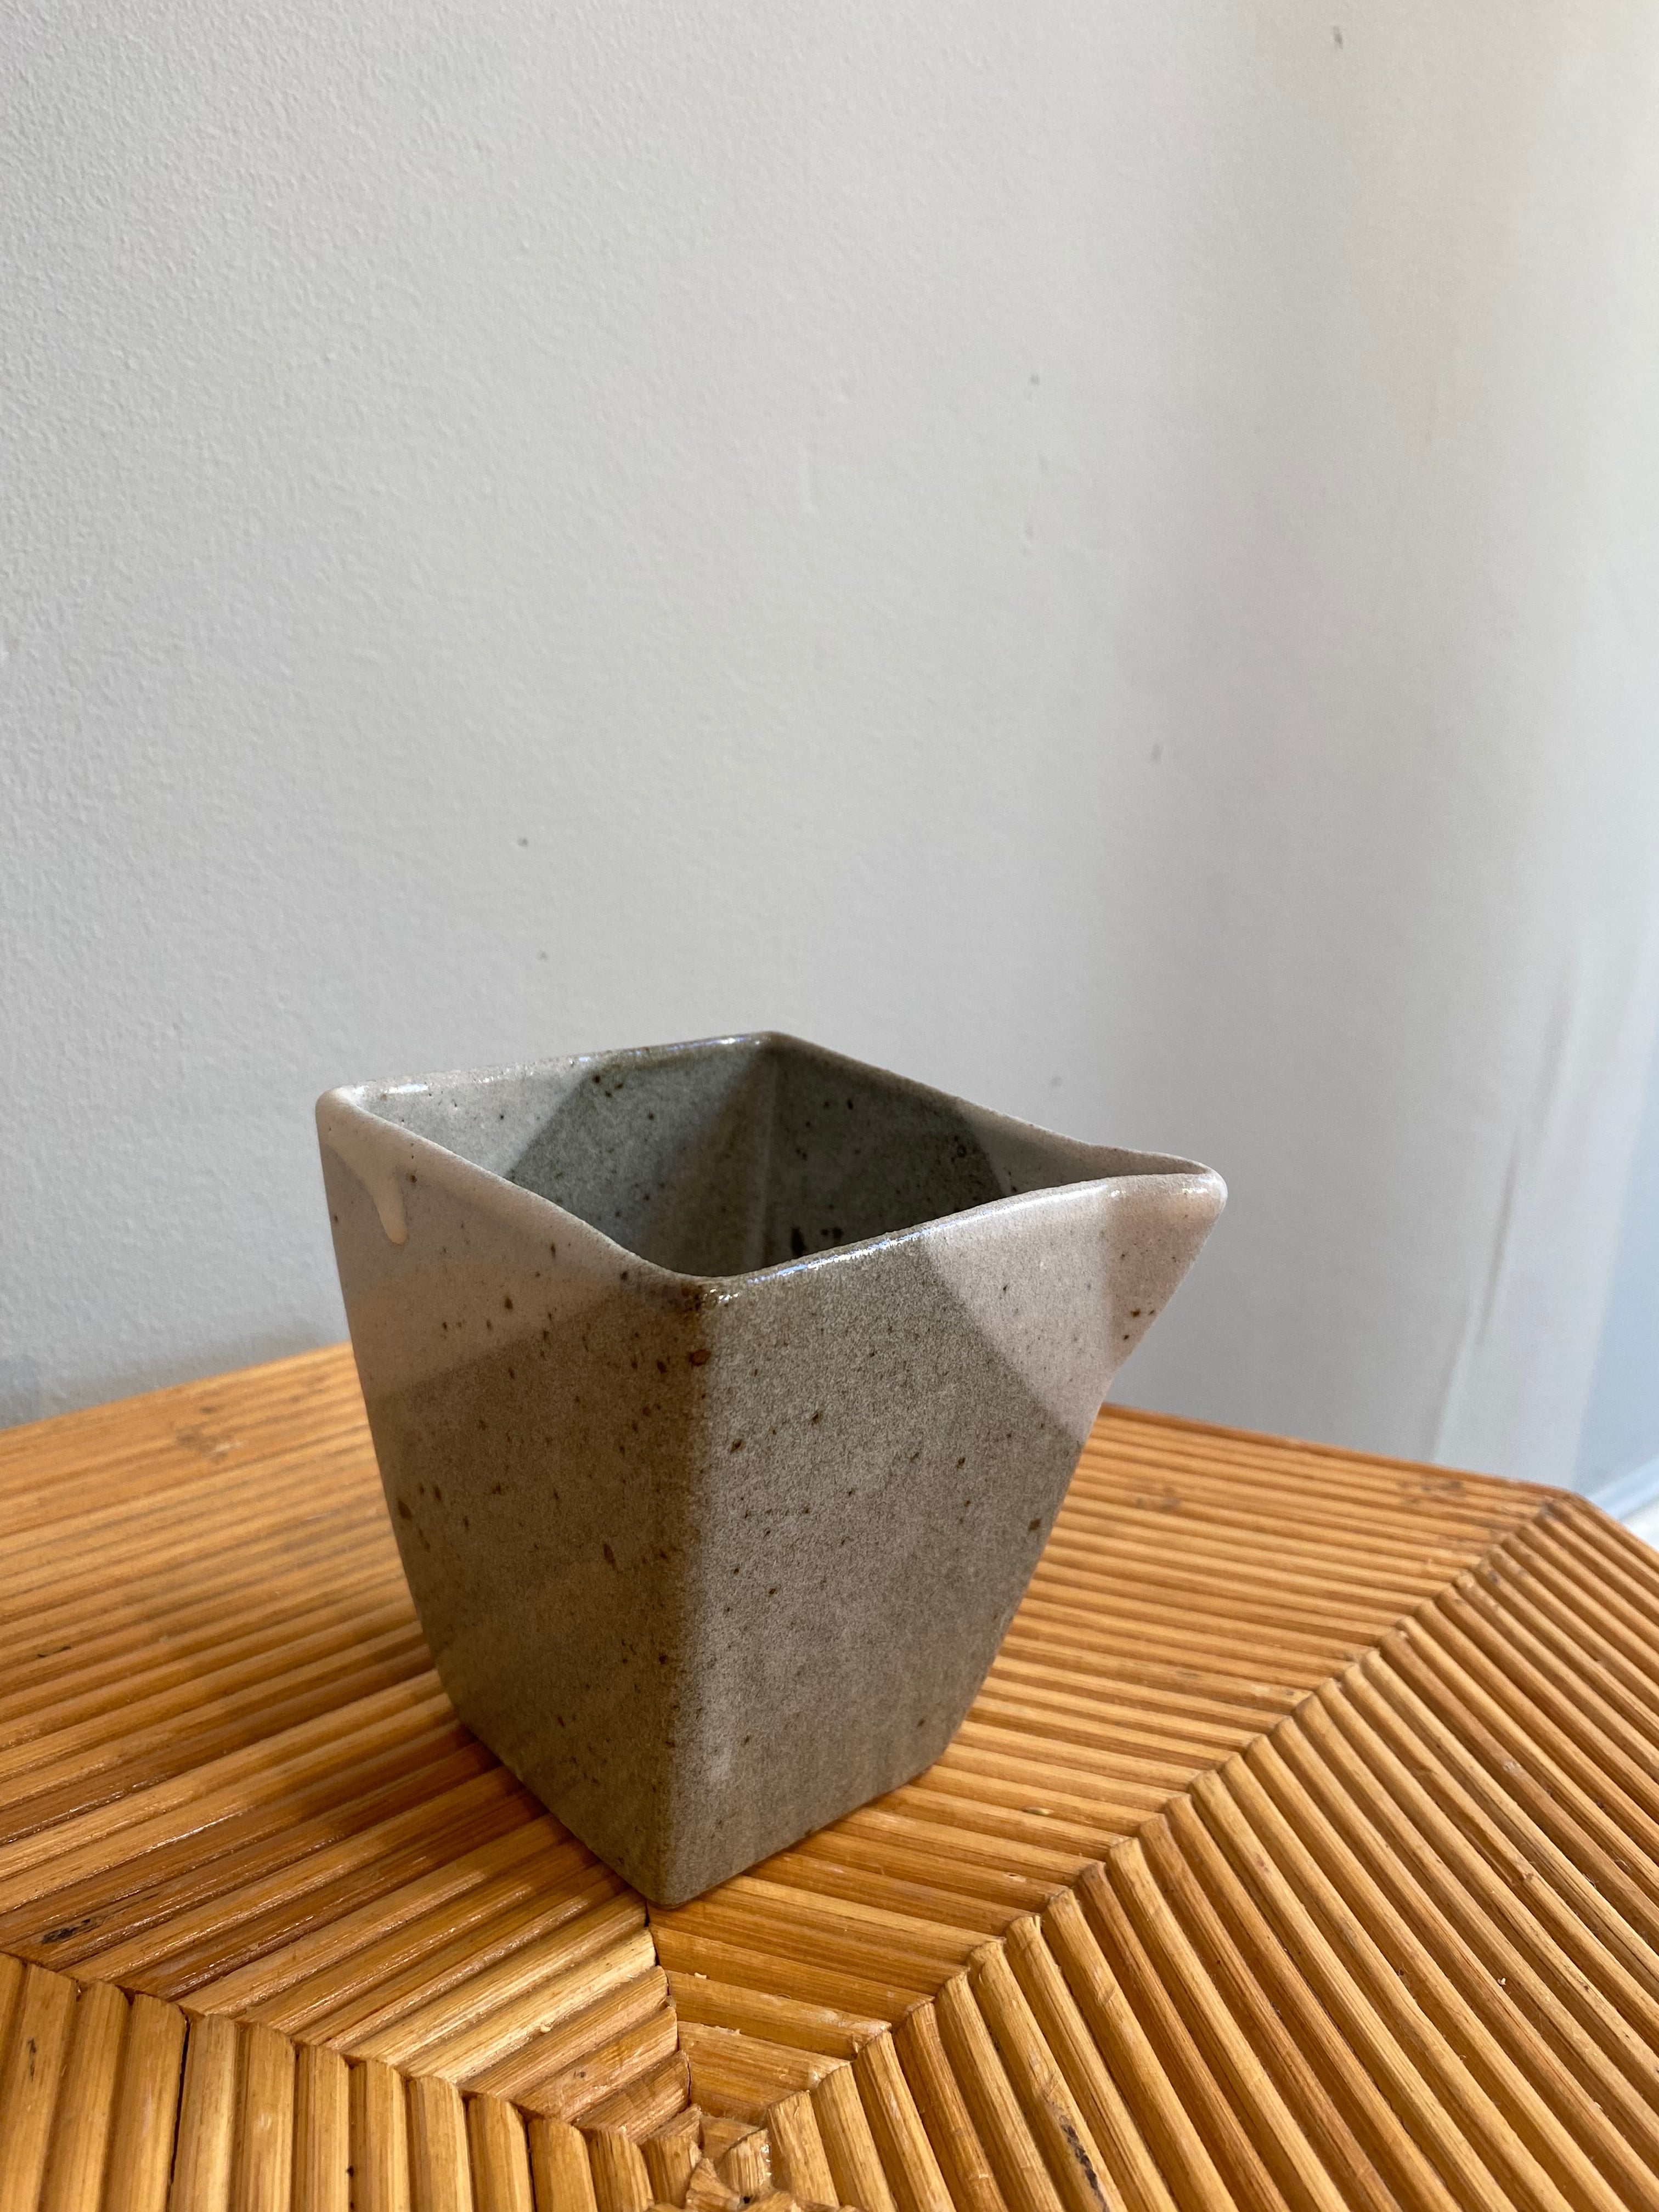 Square sake pitcher with gray glaze and crackers